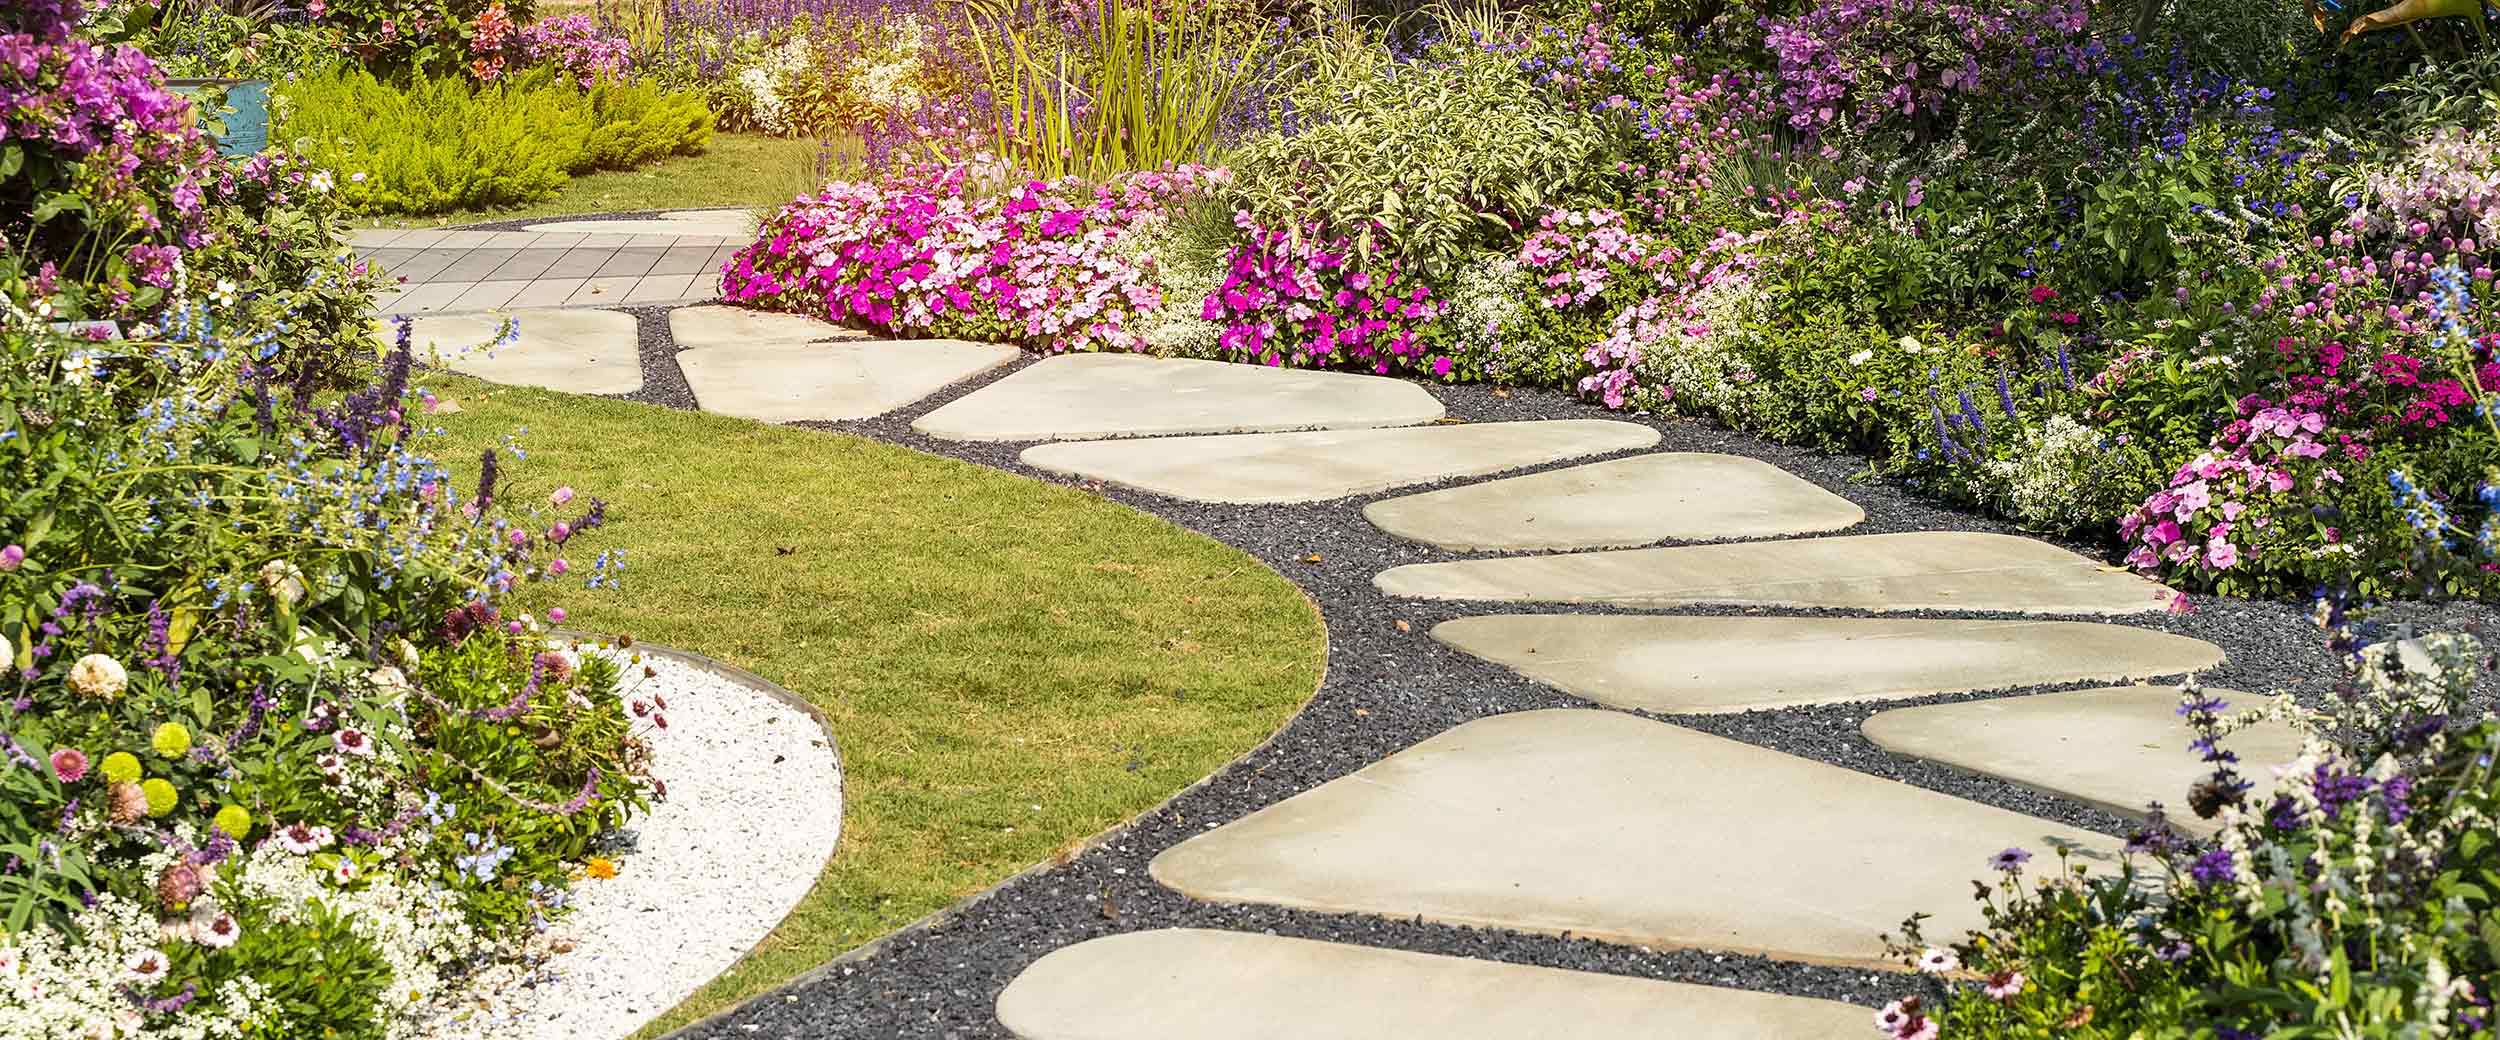 Flagstone path through garden by Finer Lawn & Landscaping